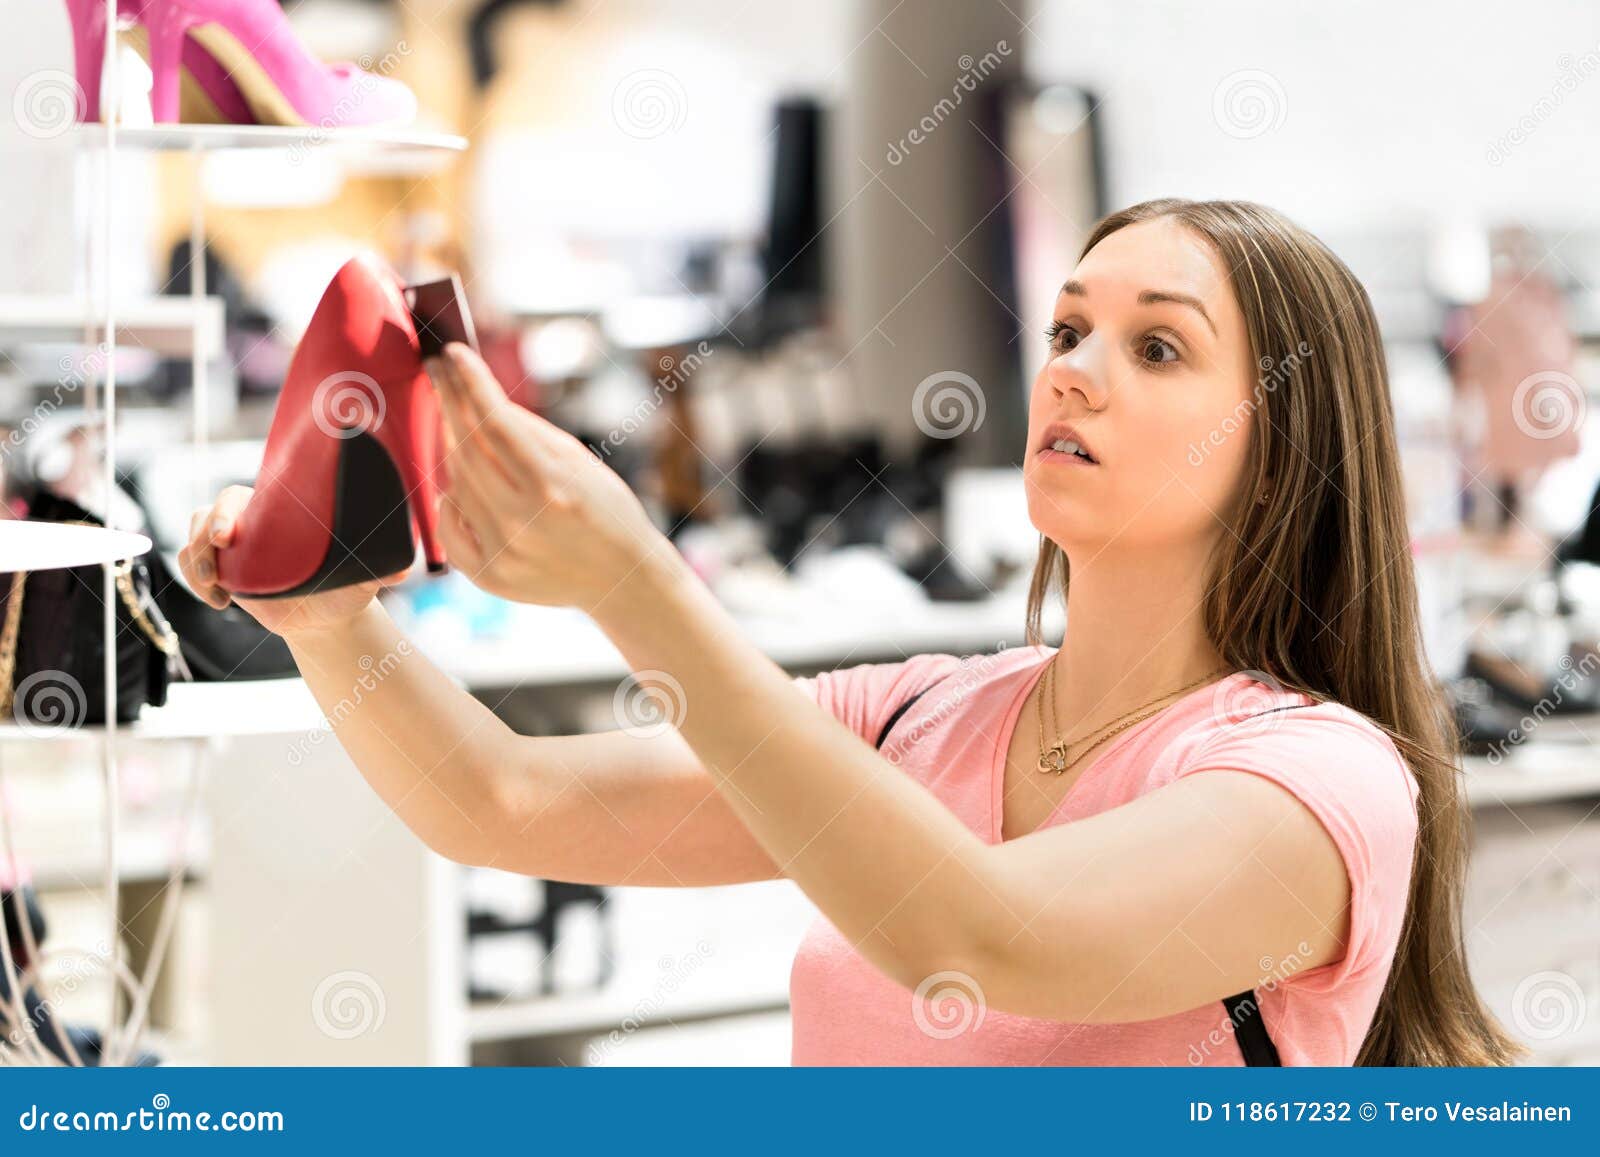 Shocked Woman Looking at Price Tag of Too Expensive Shoes. Stock Photo ...